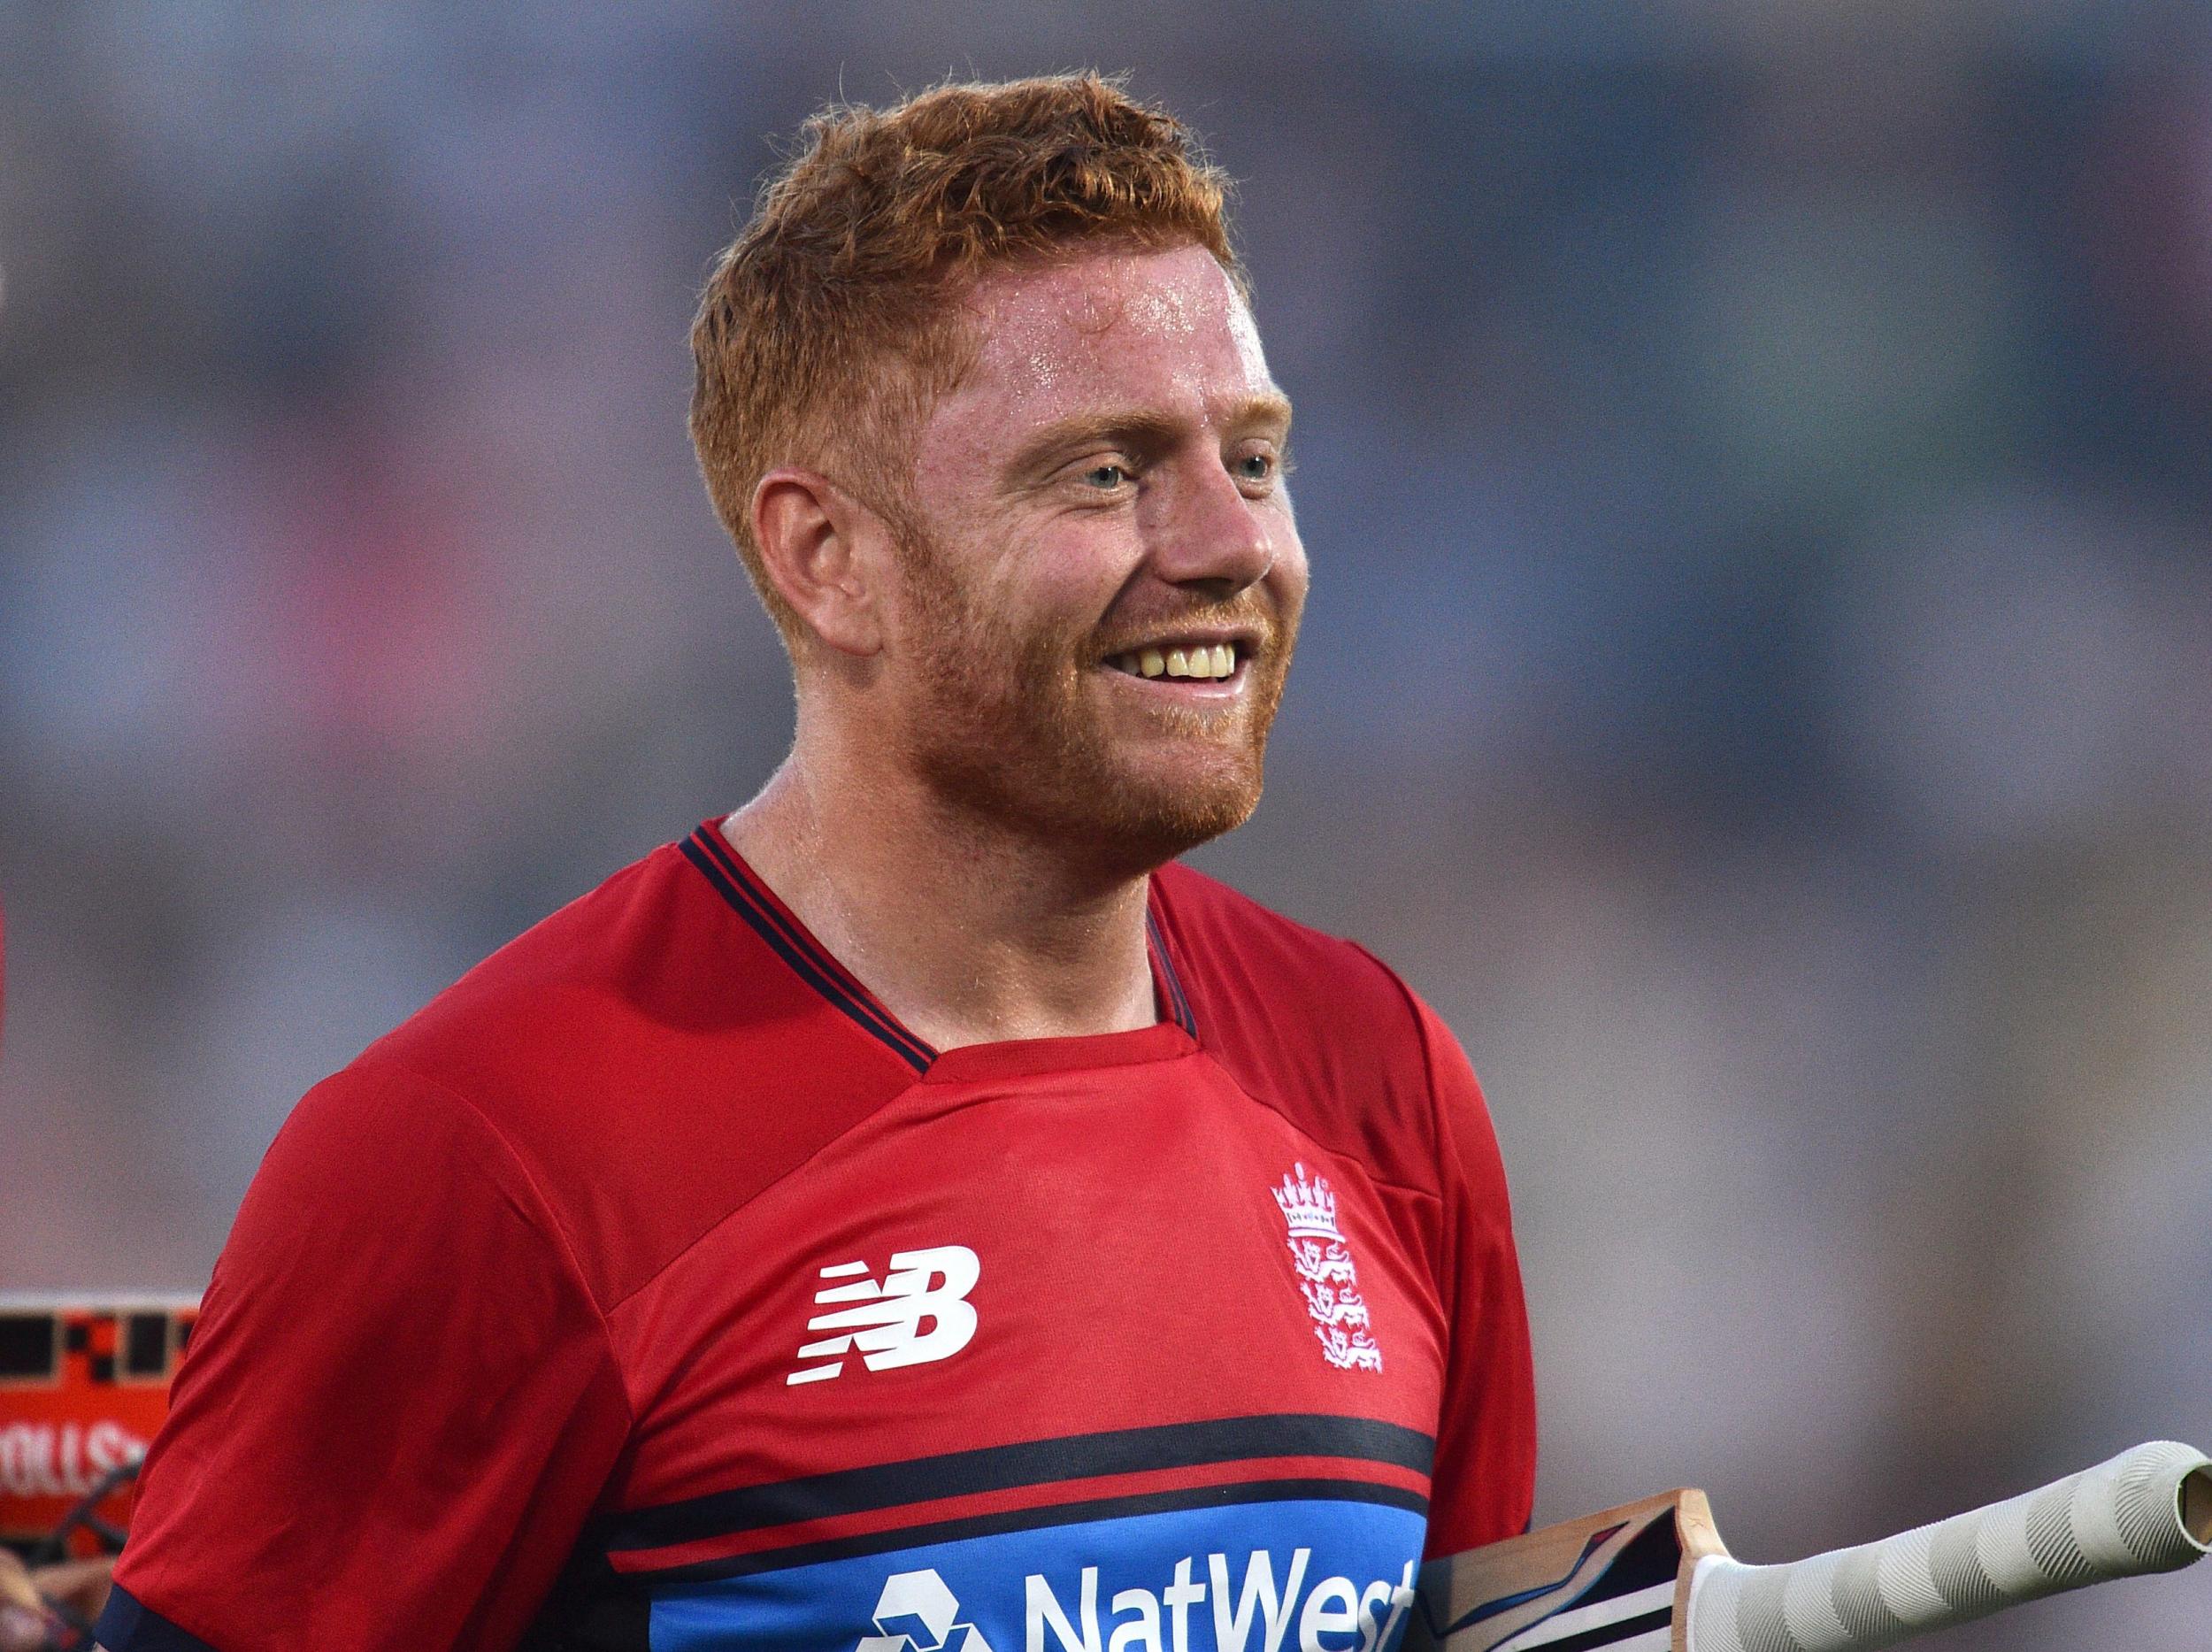 Bairstow was brilliant in England's crushing win over South Africa